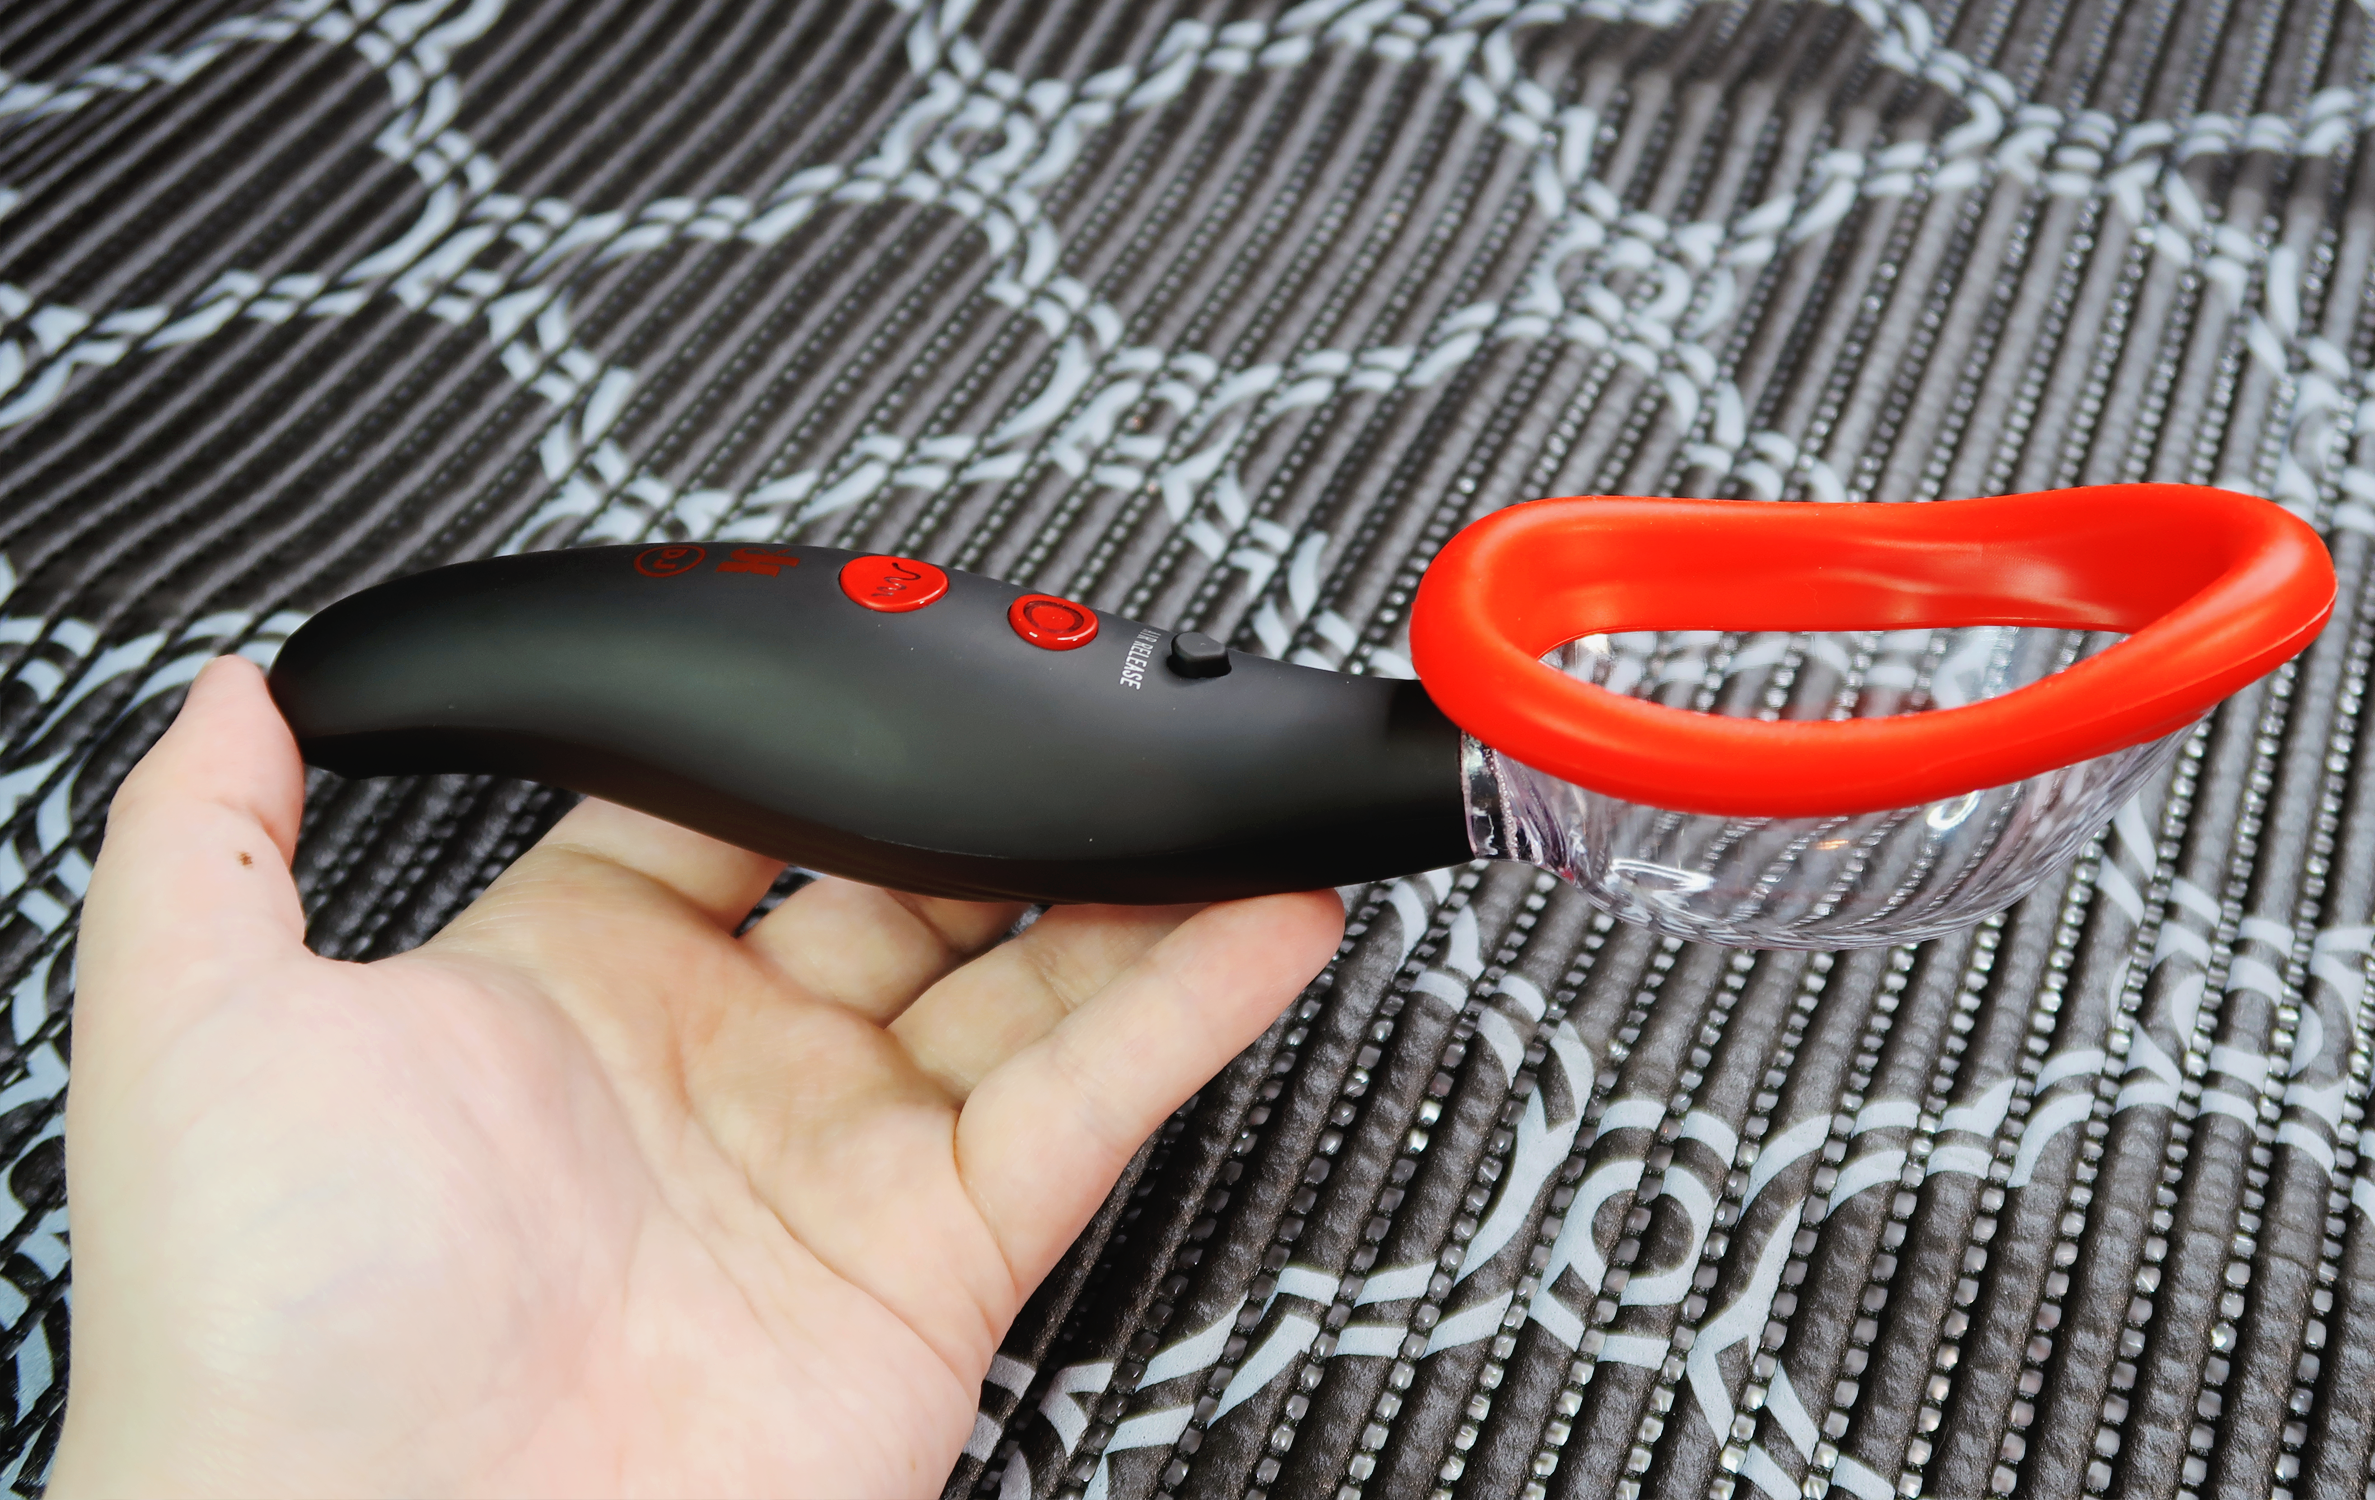 Review Kink Rechargeable Automatic Pussy Pump by Doc Johnson